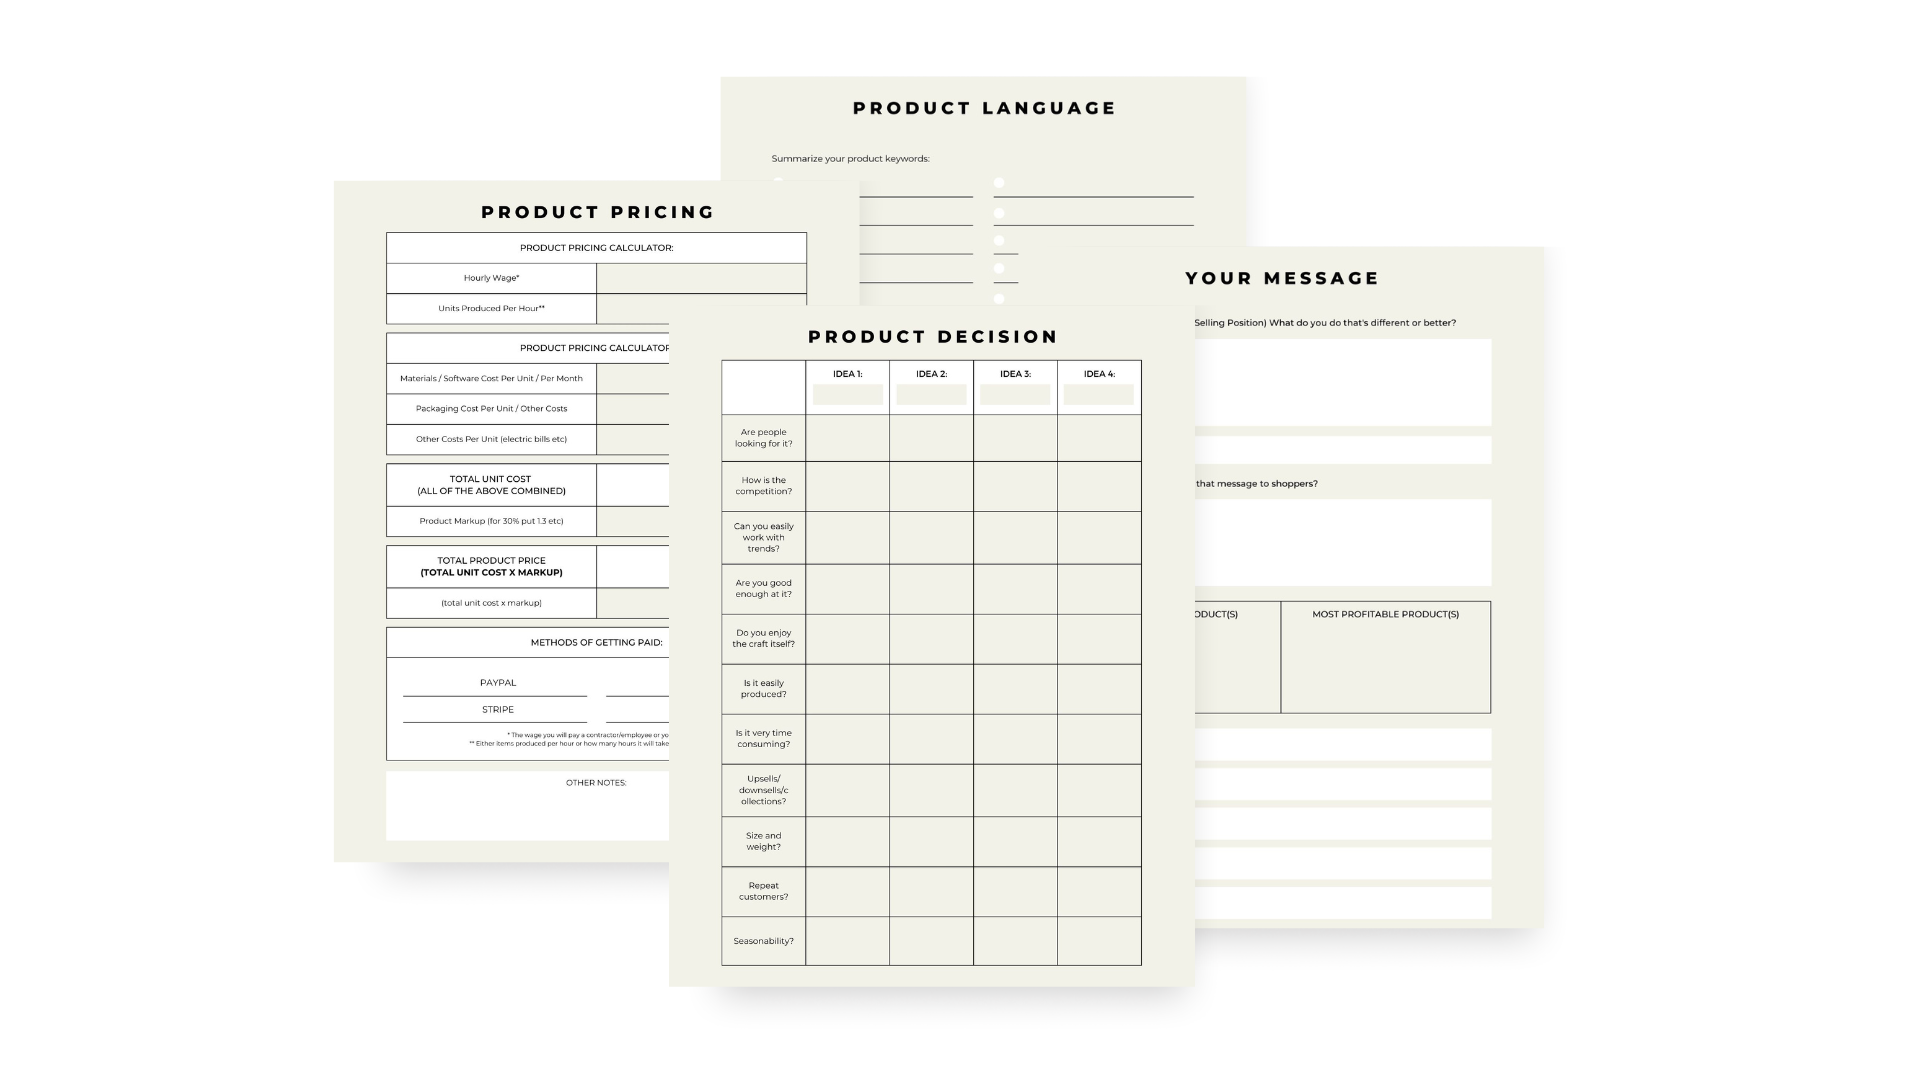 Creative Business Planner and Organizer - Instant Download